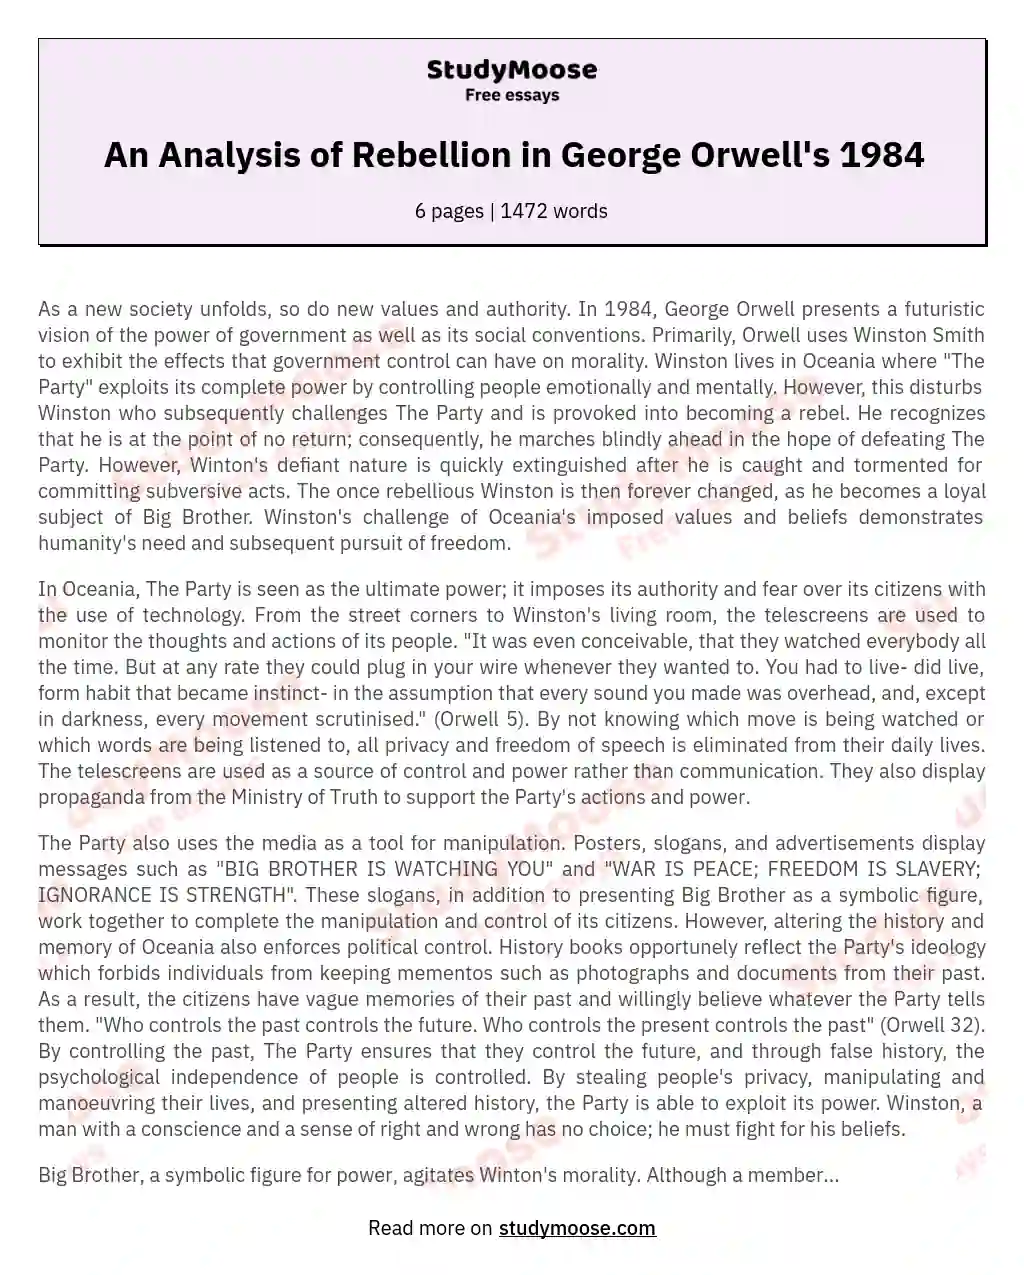 An Analysis of Rebellion in George Orwell's 1984 essay